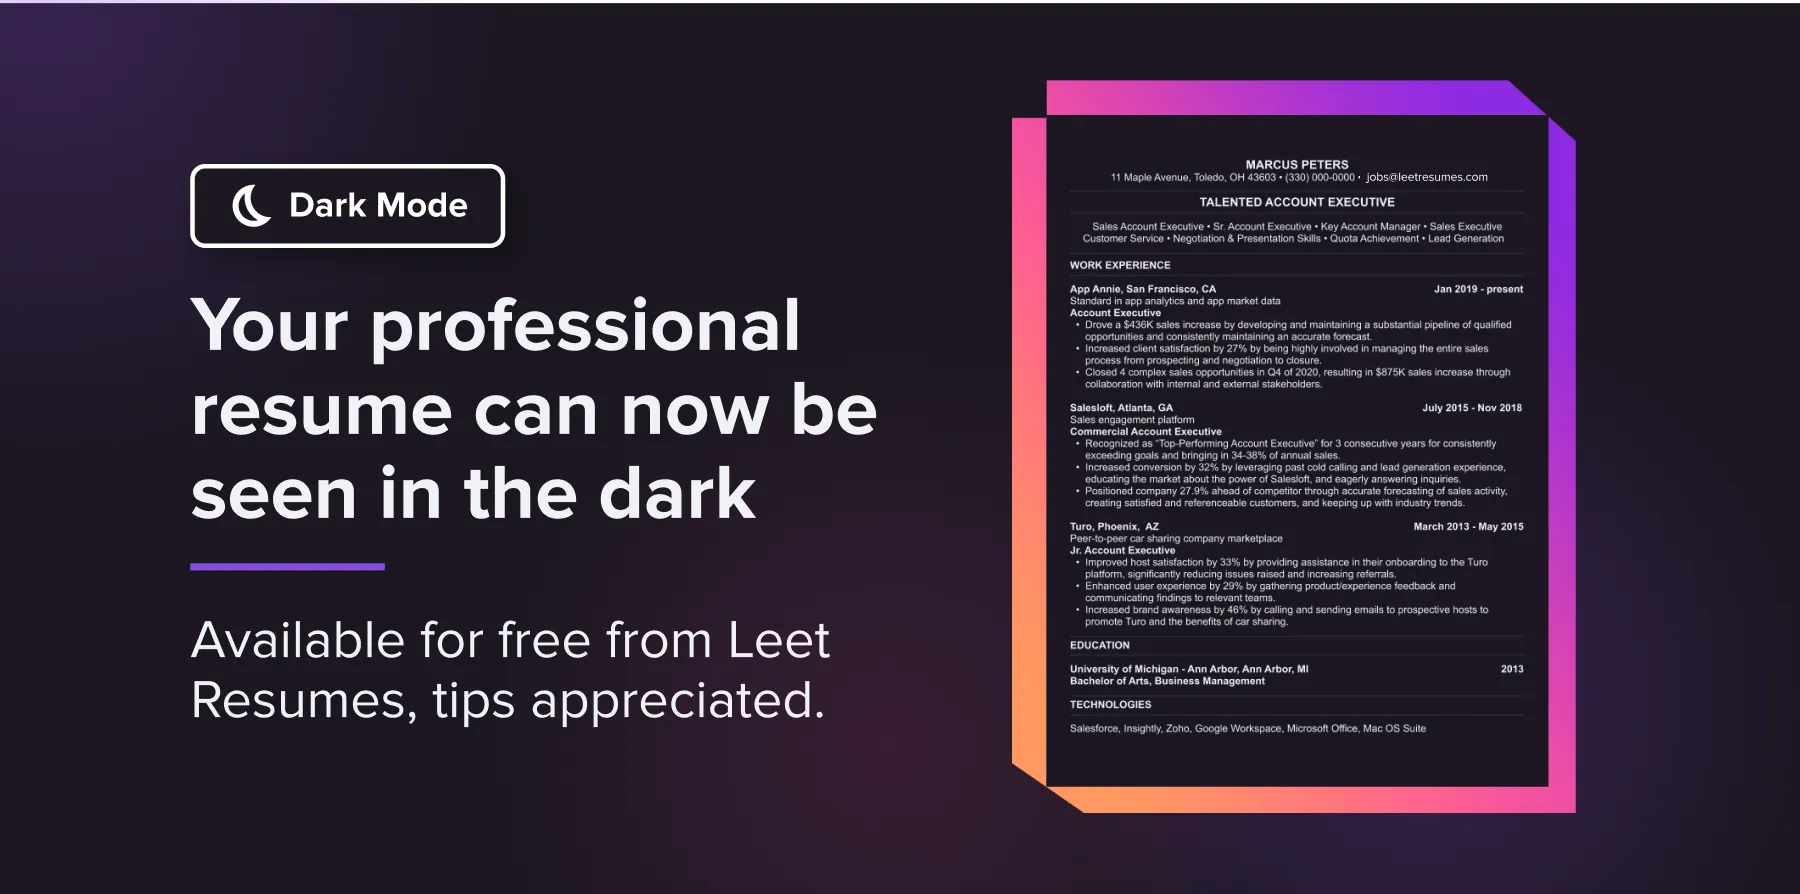 We’ve launched Dark Mode resume to get you noticed